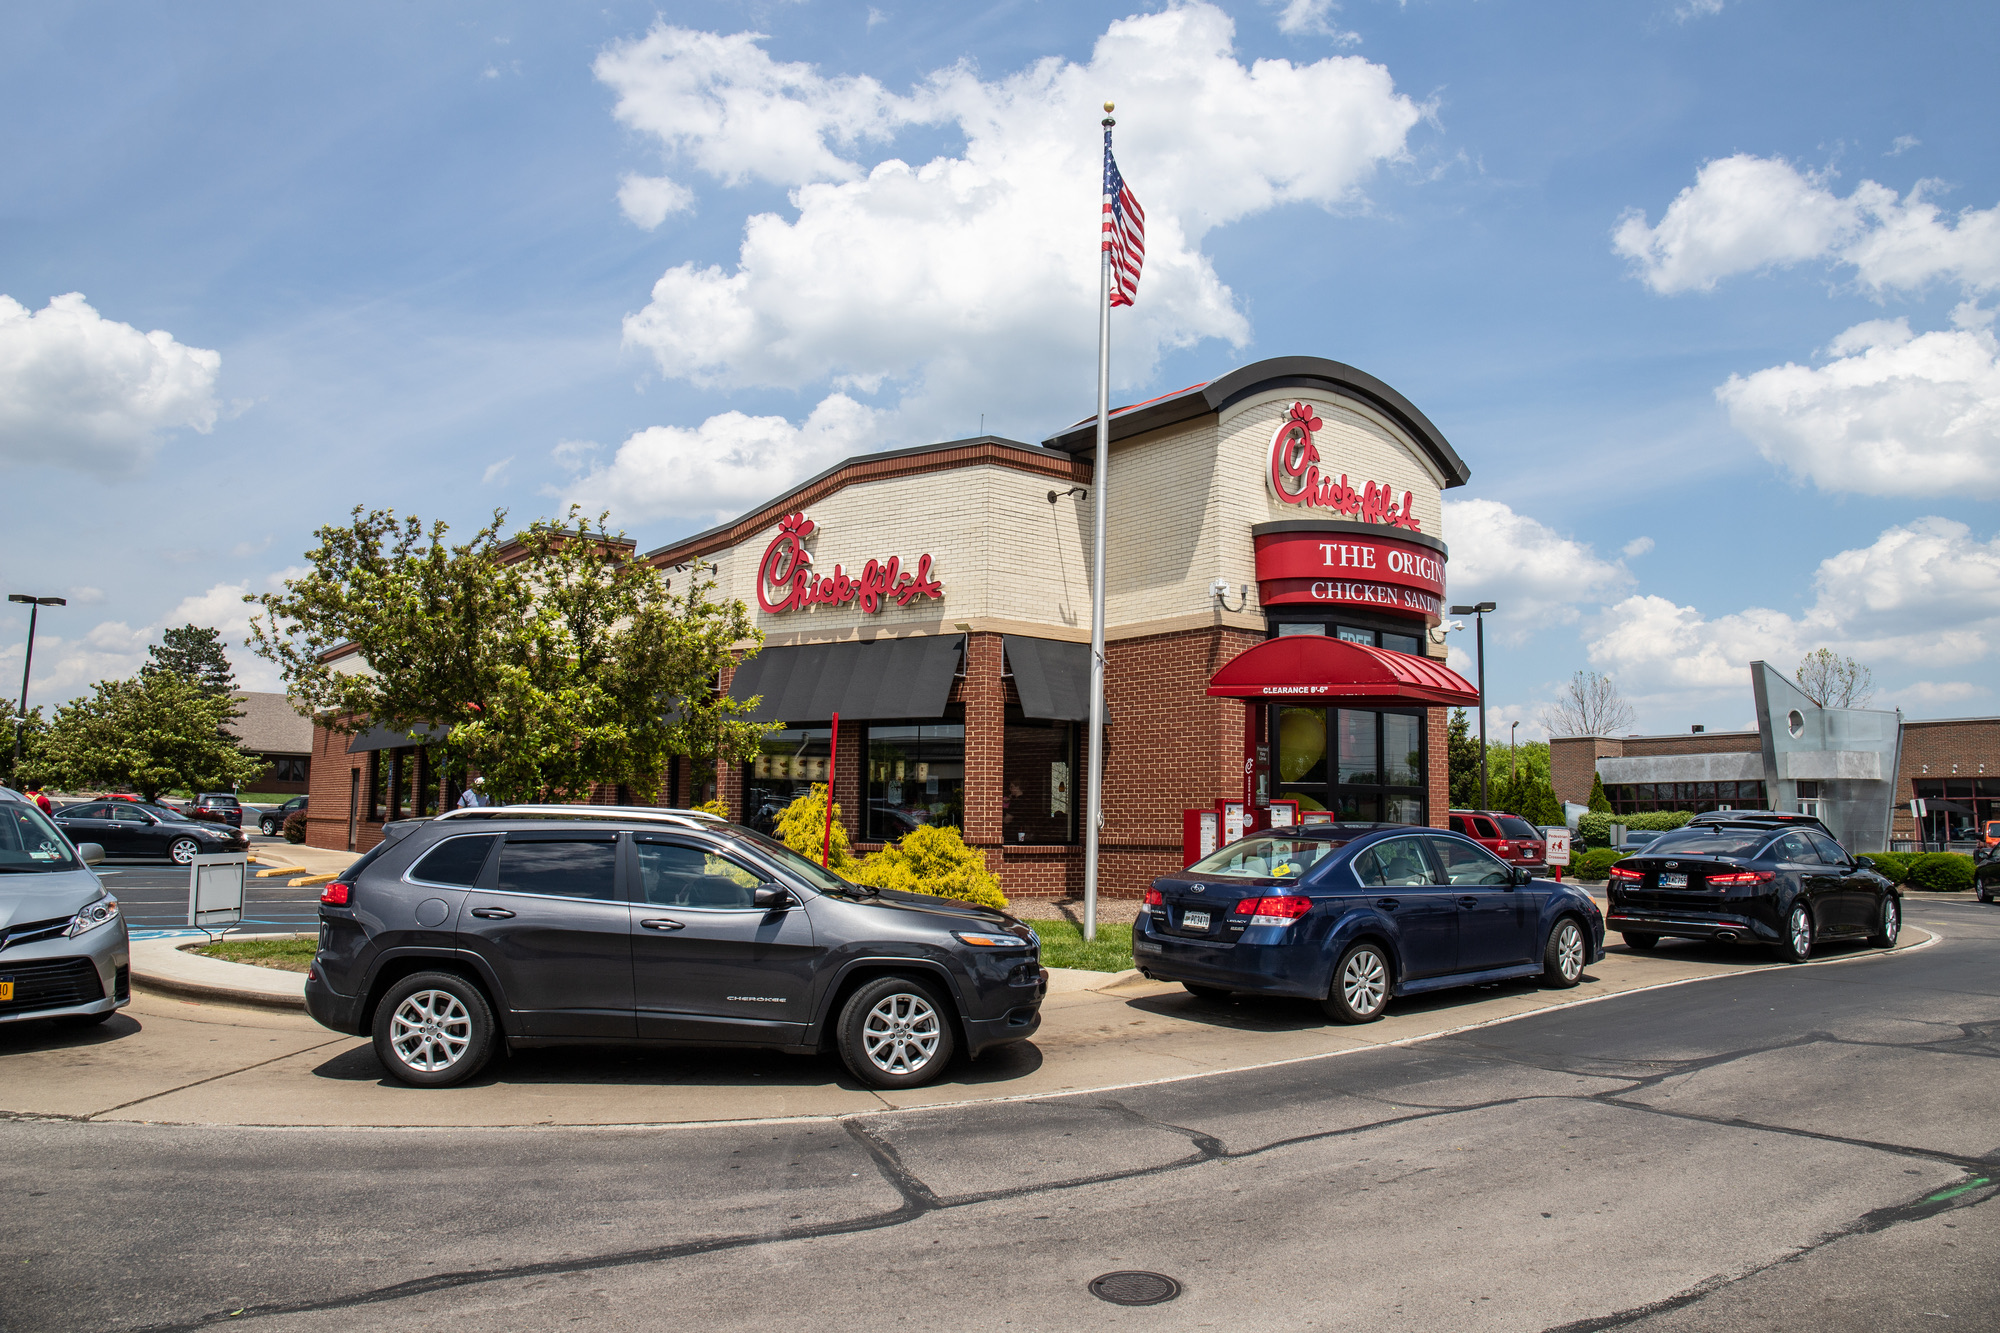 Indianapolis - Circa May 2019: Chick-fil-A chicken restaurant. Despite ongoing controversy, Chick-fil-A is wildly popular II